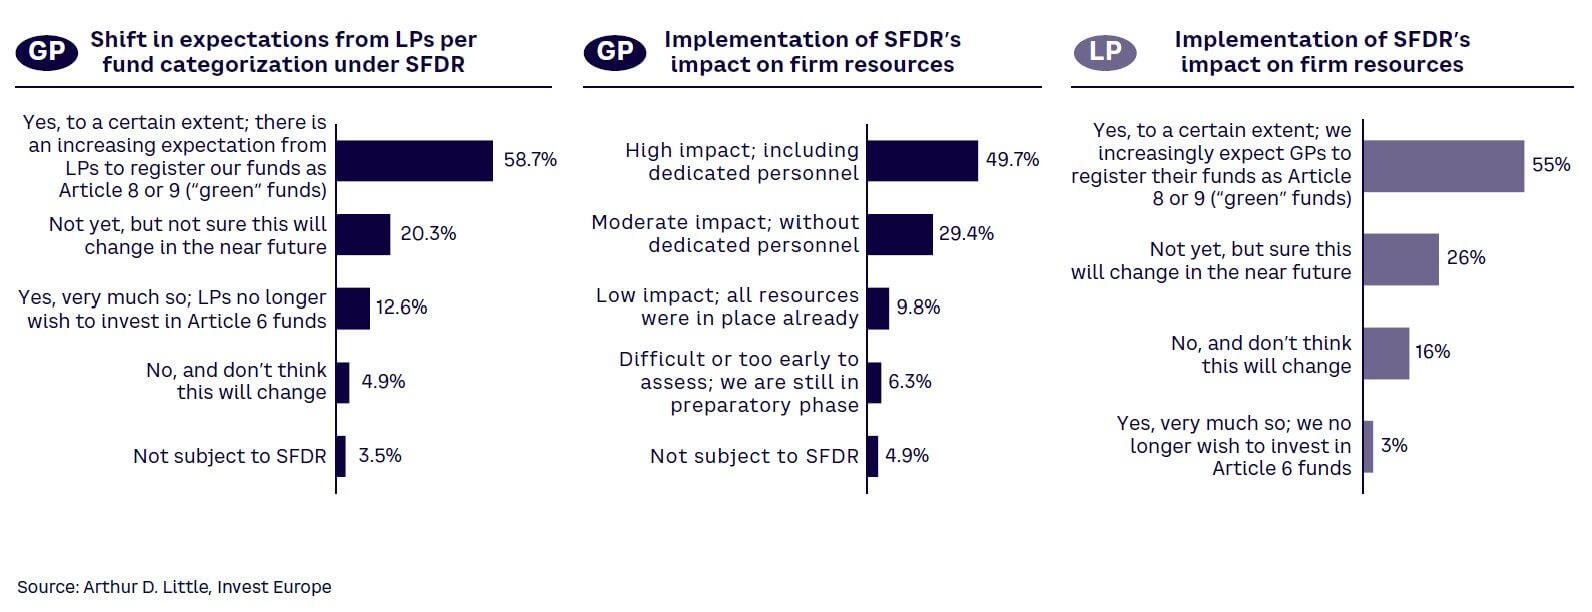 Figure 21. Expected impact on fund categorization and resource needs due to SFDR